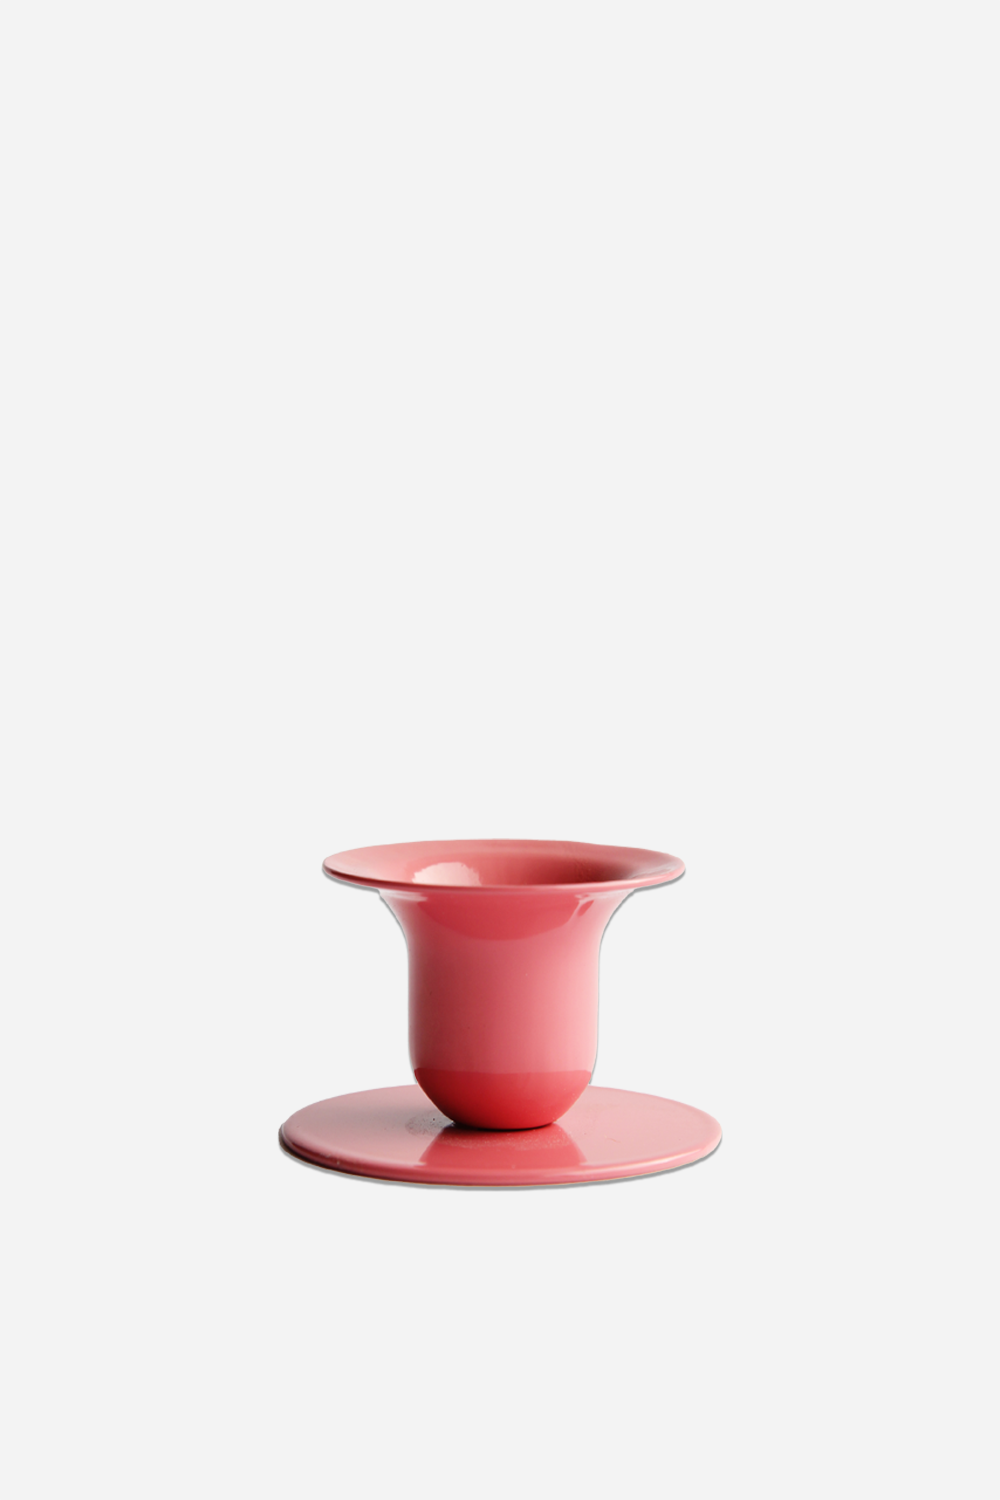 The Bell Candlestick / Antique Pink